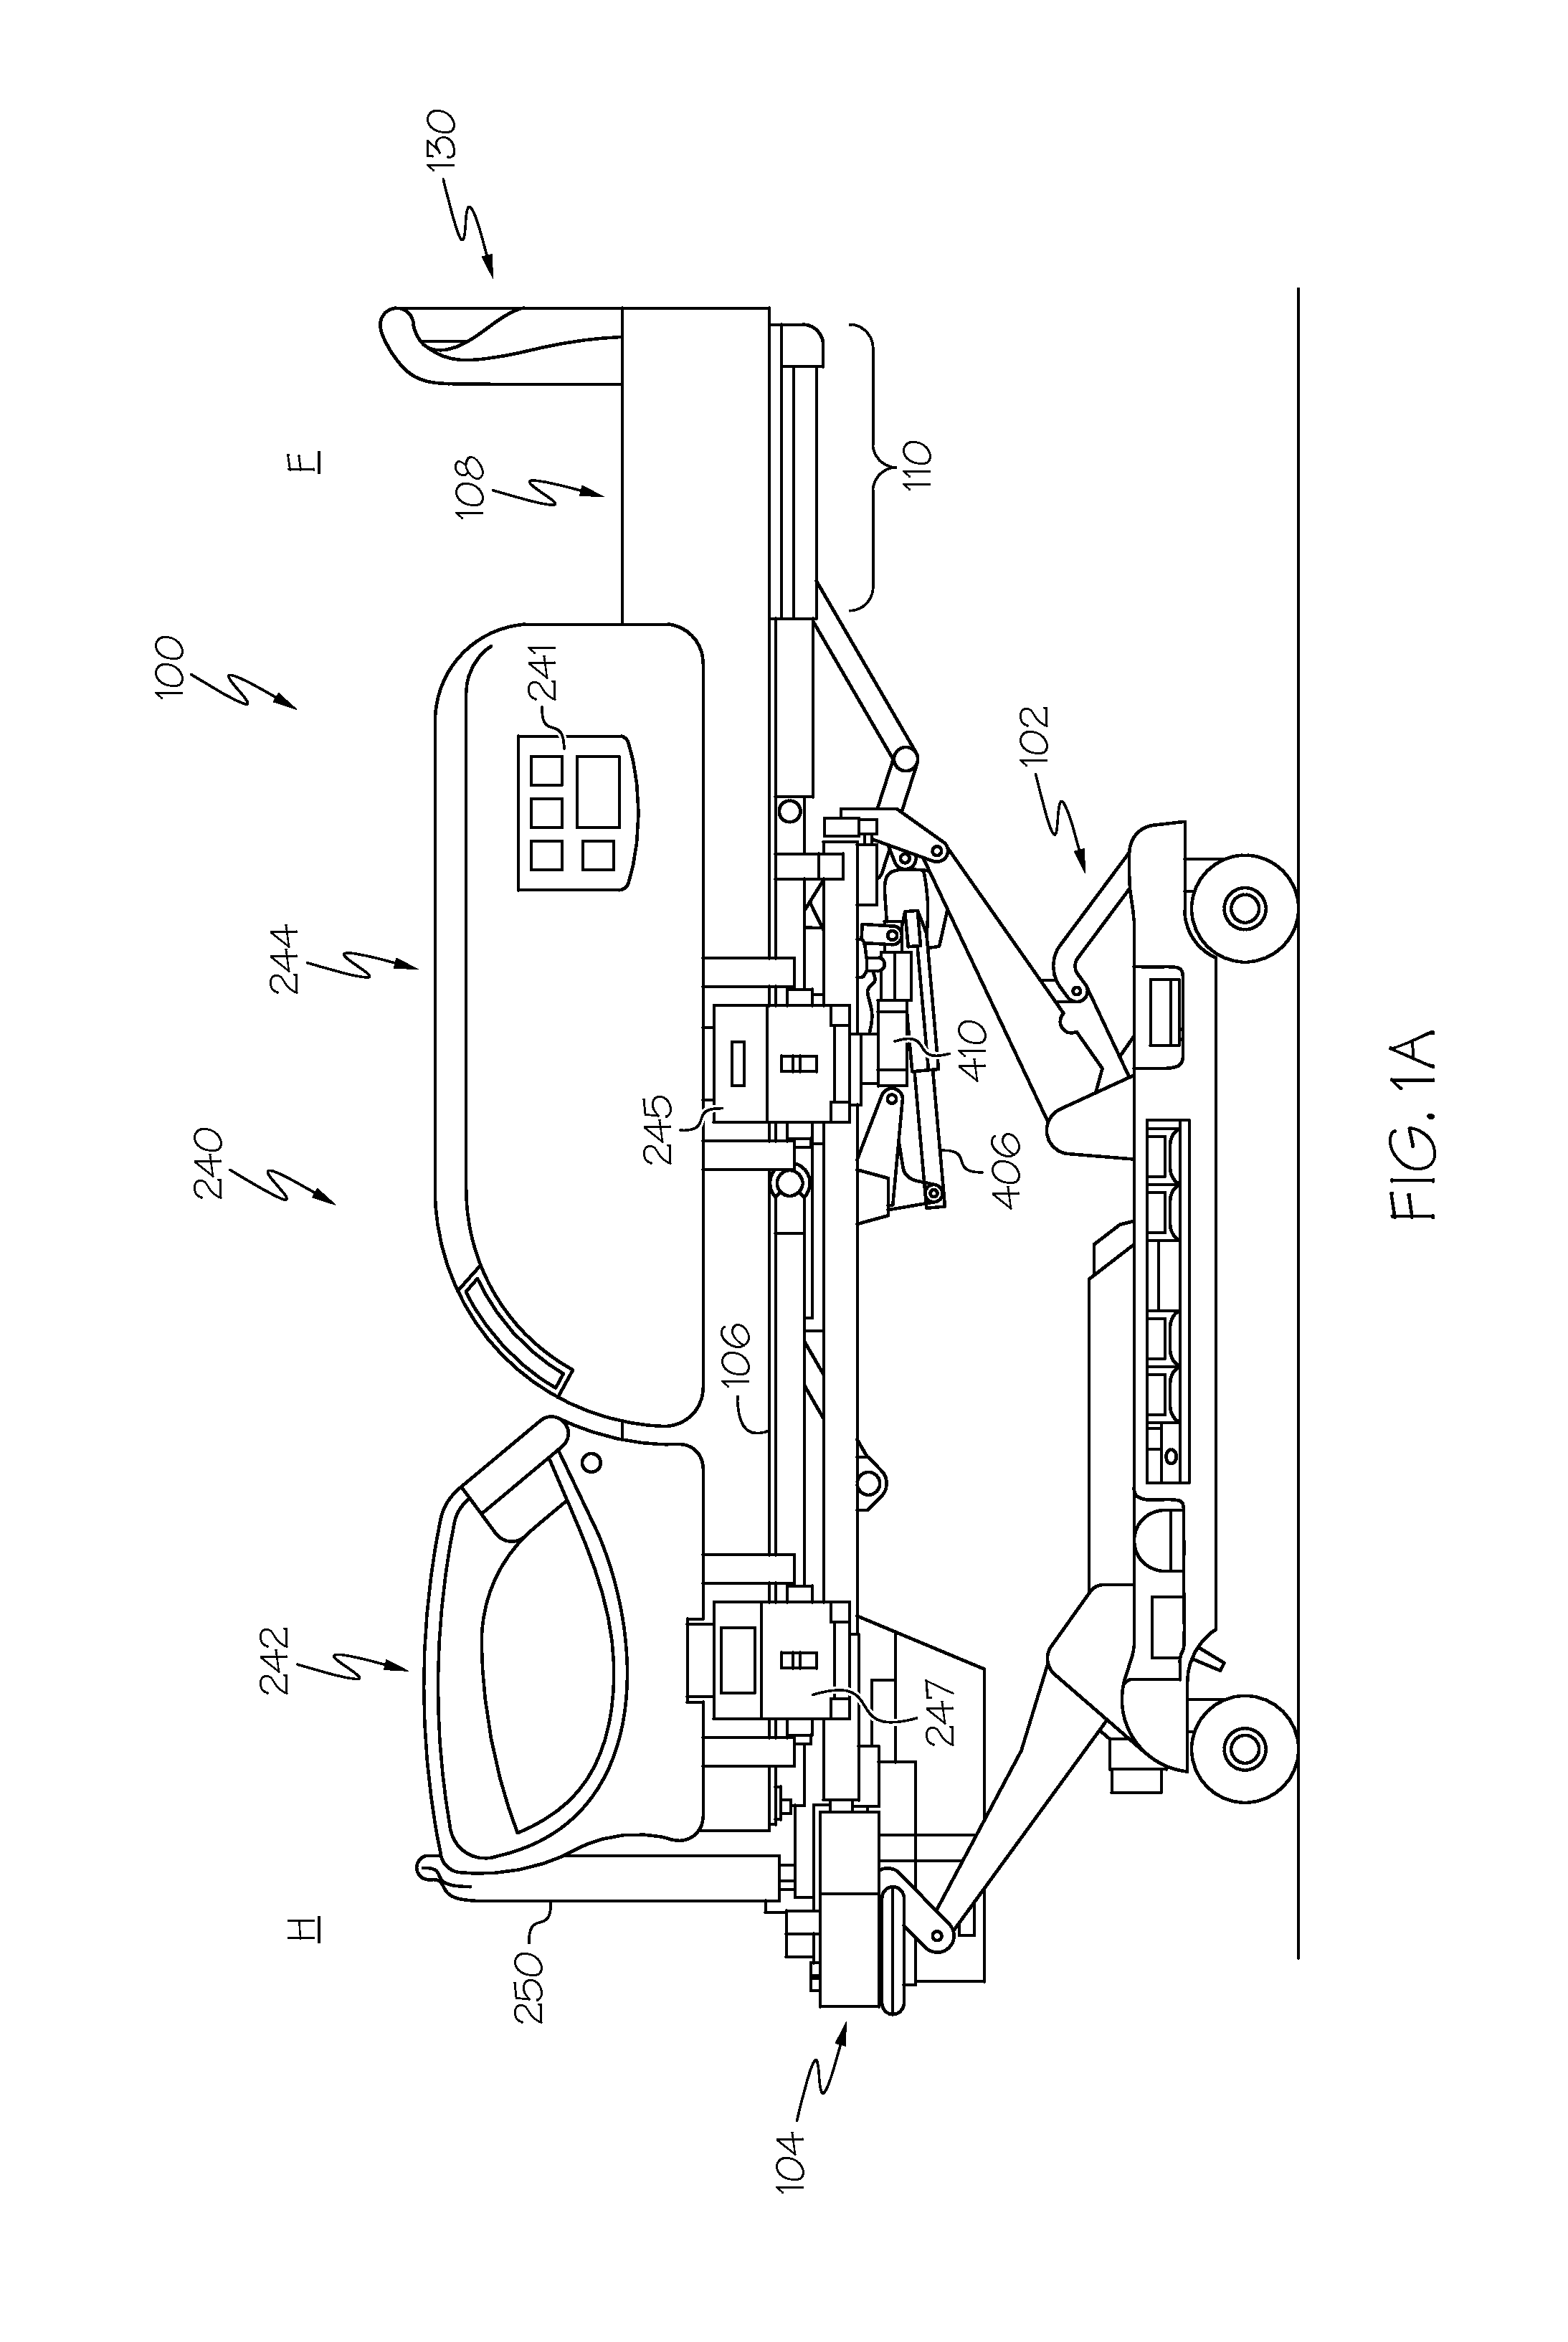 Person support apparatuses with exercise functionalities